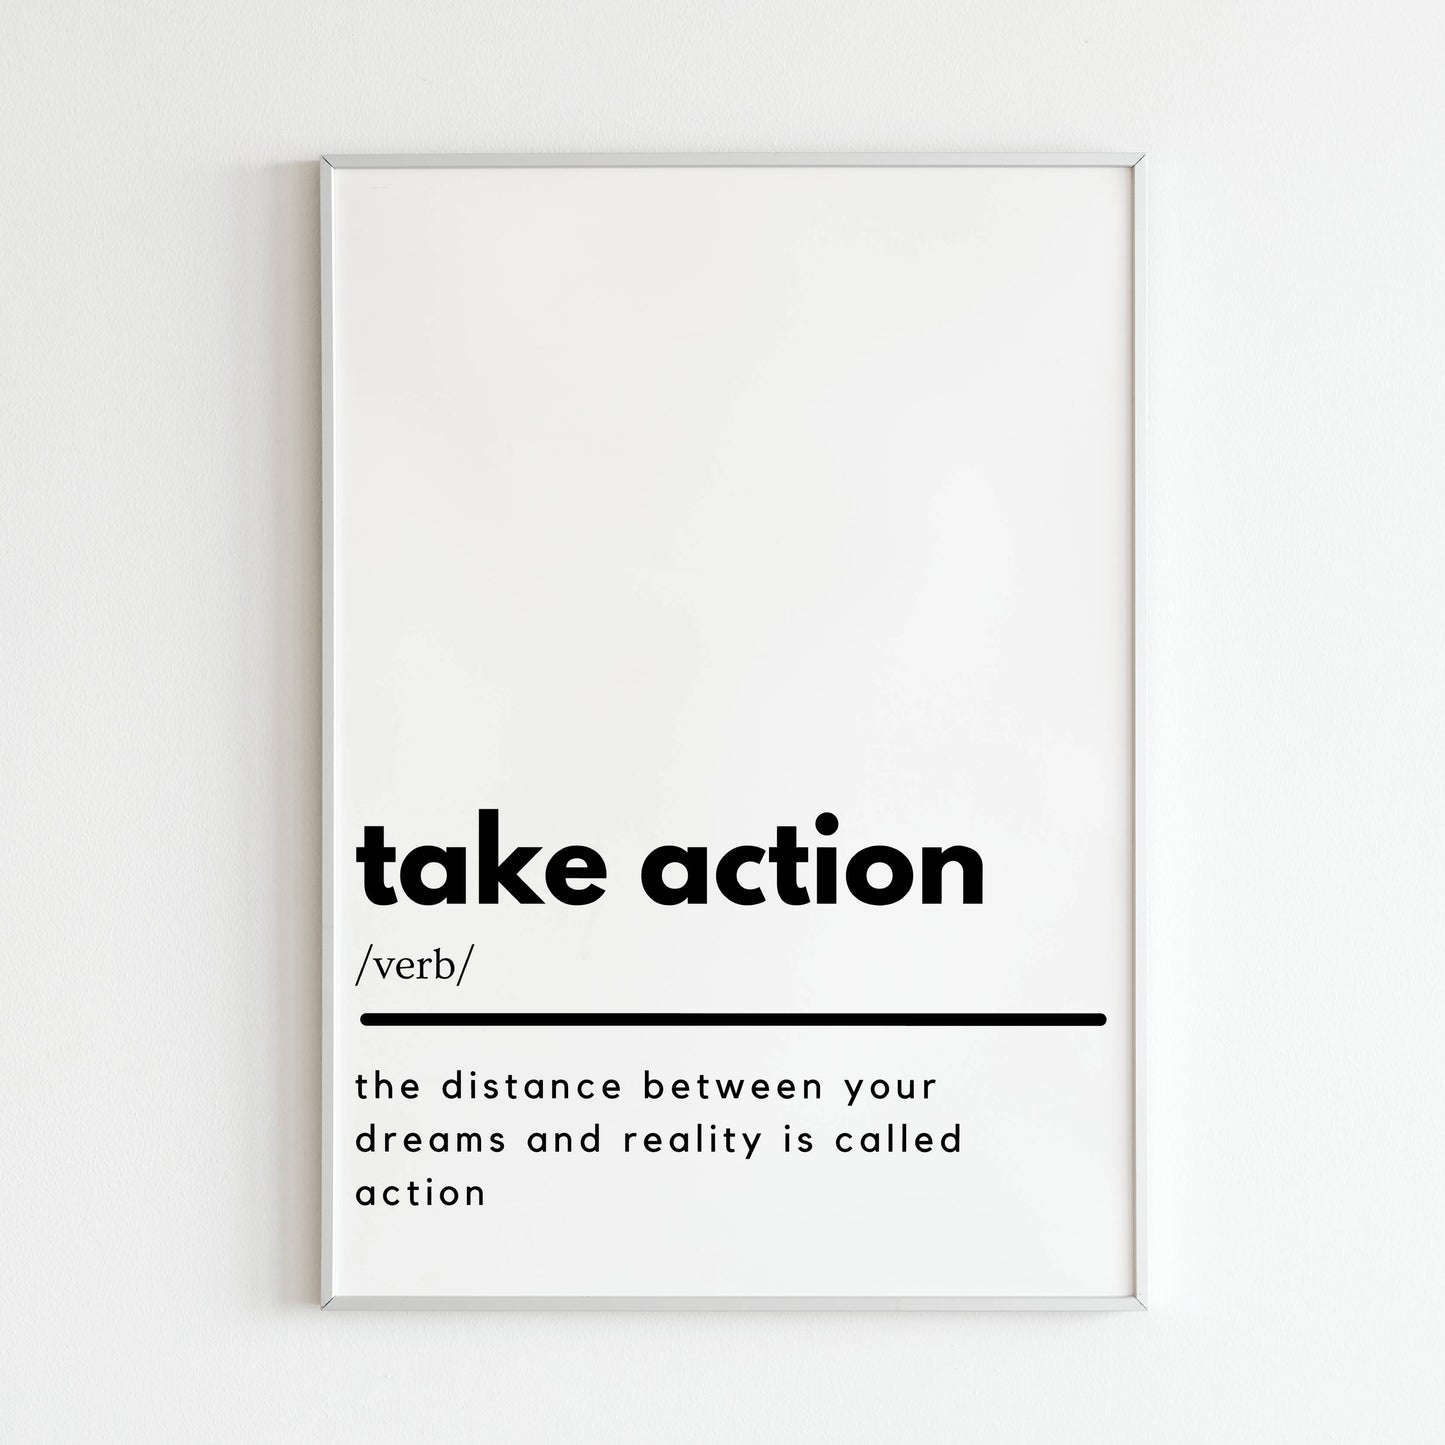 Take Action close-up of printable wall art poster. Focus on the bold lettering and empowering message.